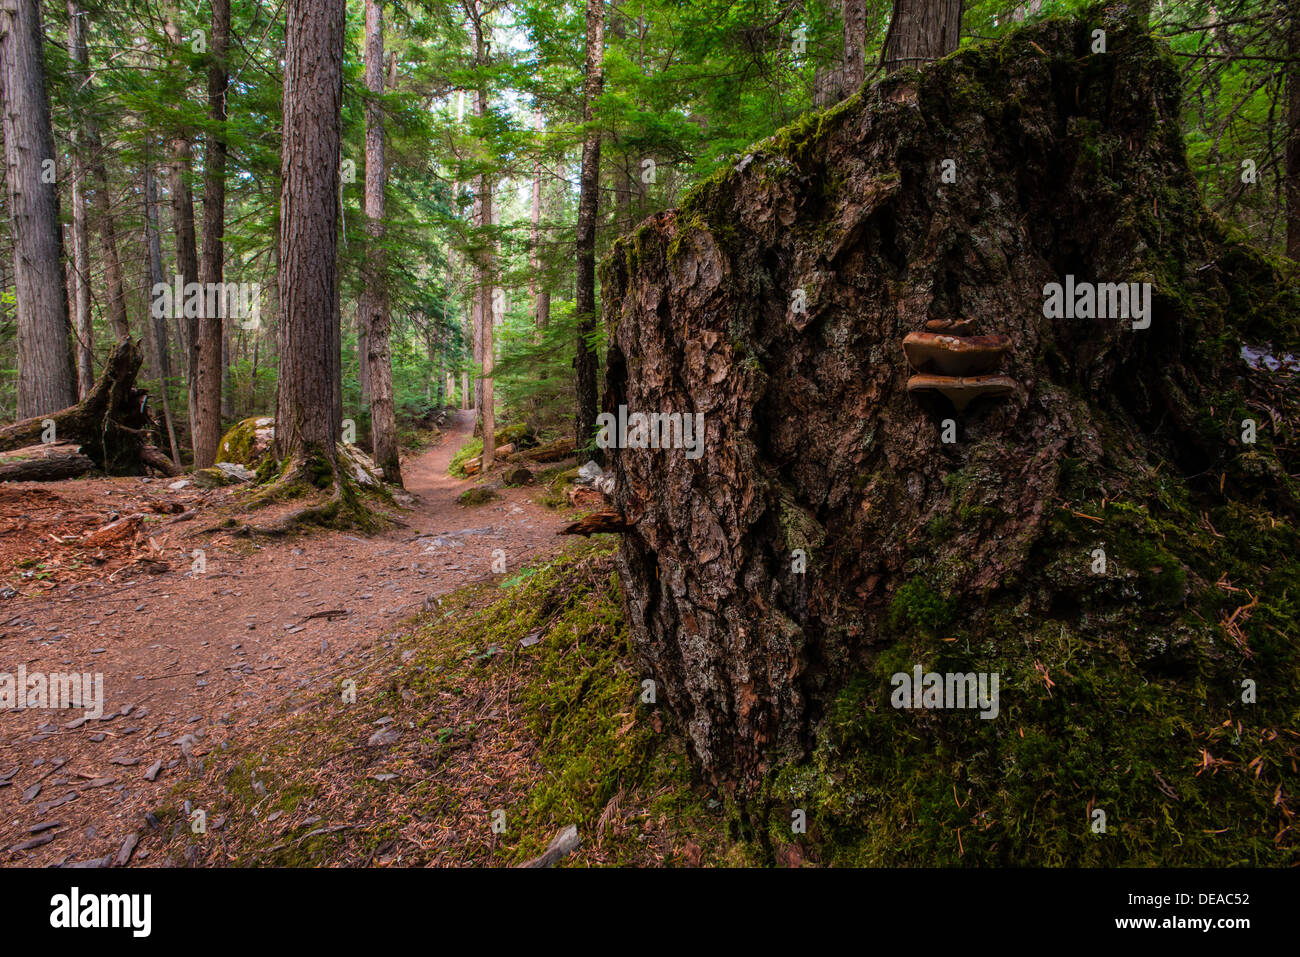 A trail leading deep into a lush green forest, with fungi growing on a stump in the foreground. Stock Photo